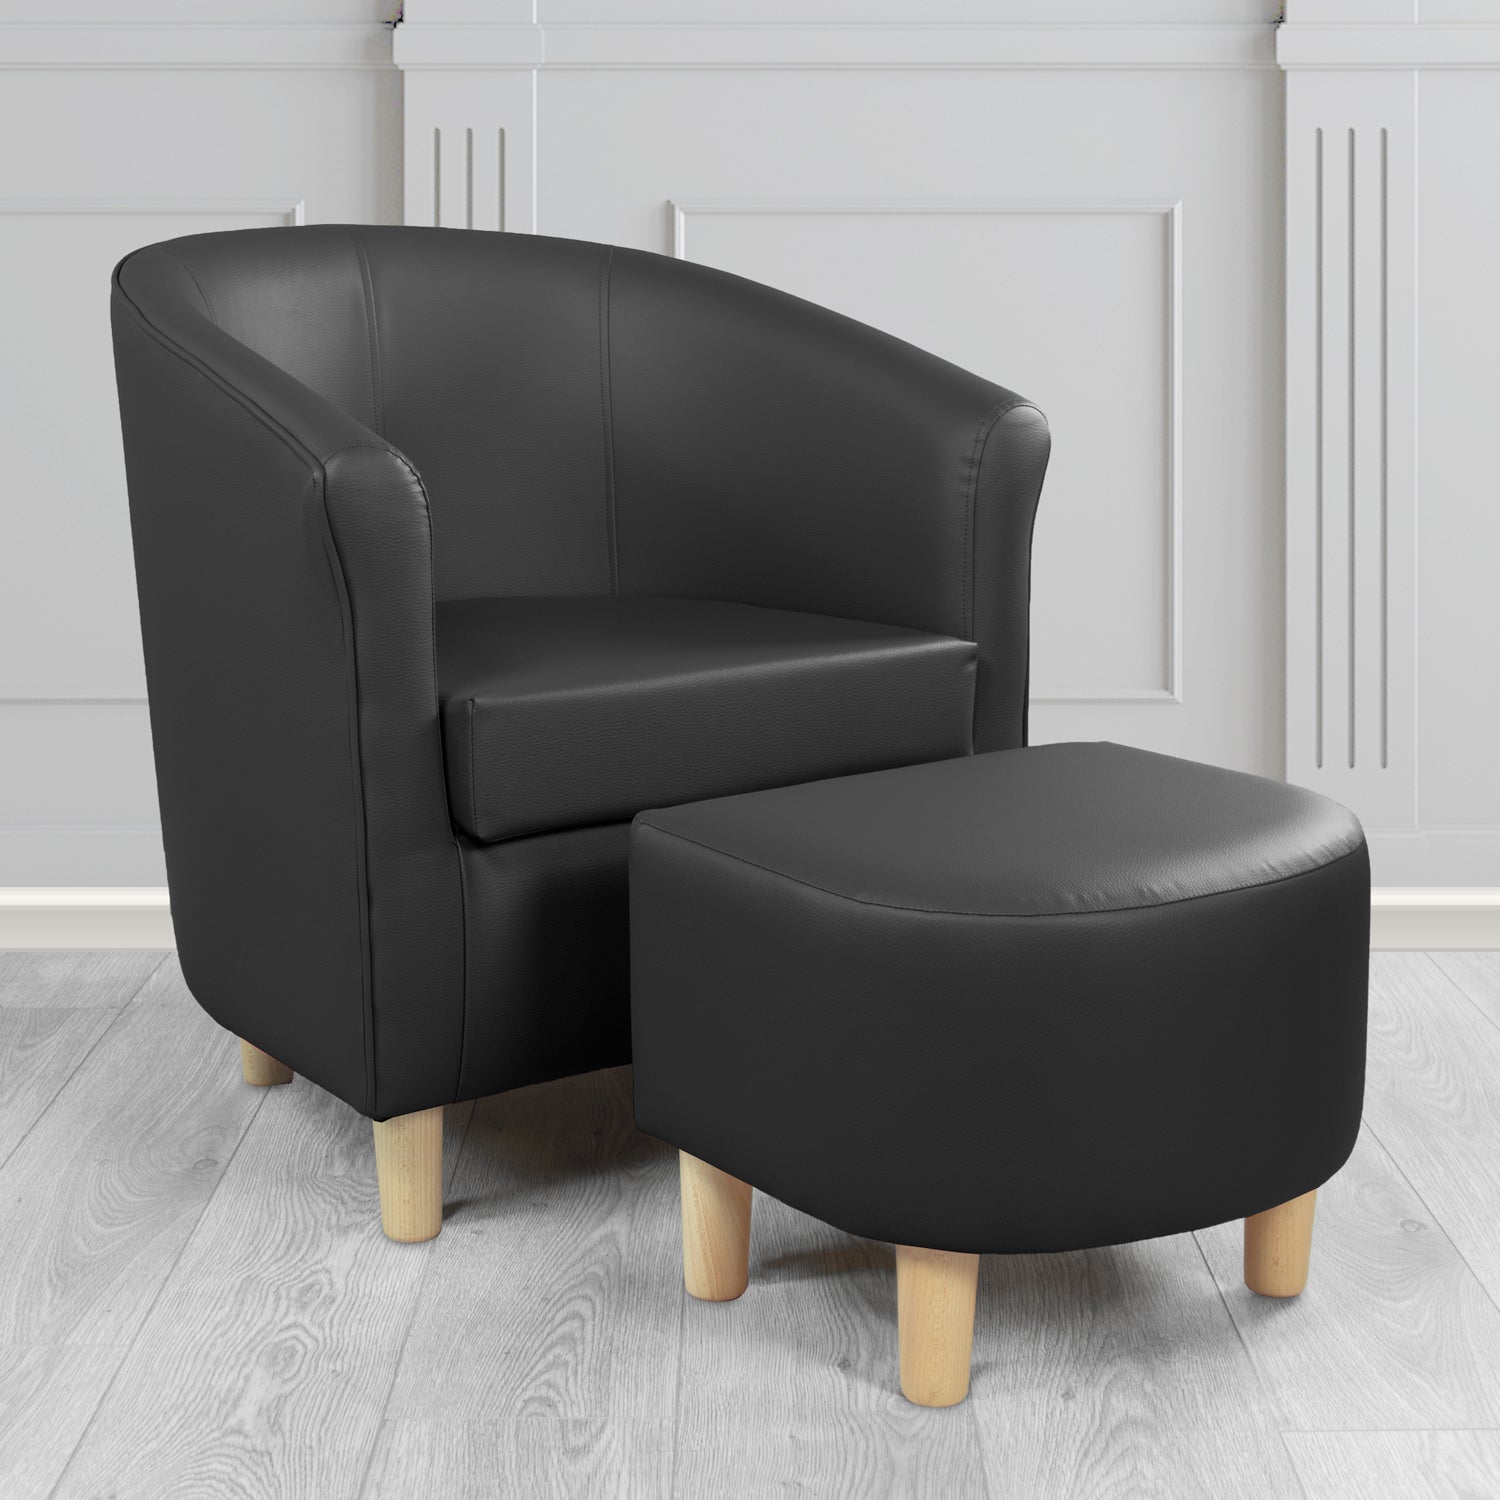 Tuscany Tub Chair with Footstool Set in Madrid Black Faux Leather - The Tub Chair Shop